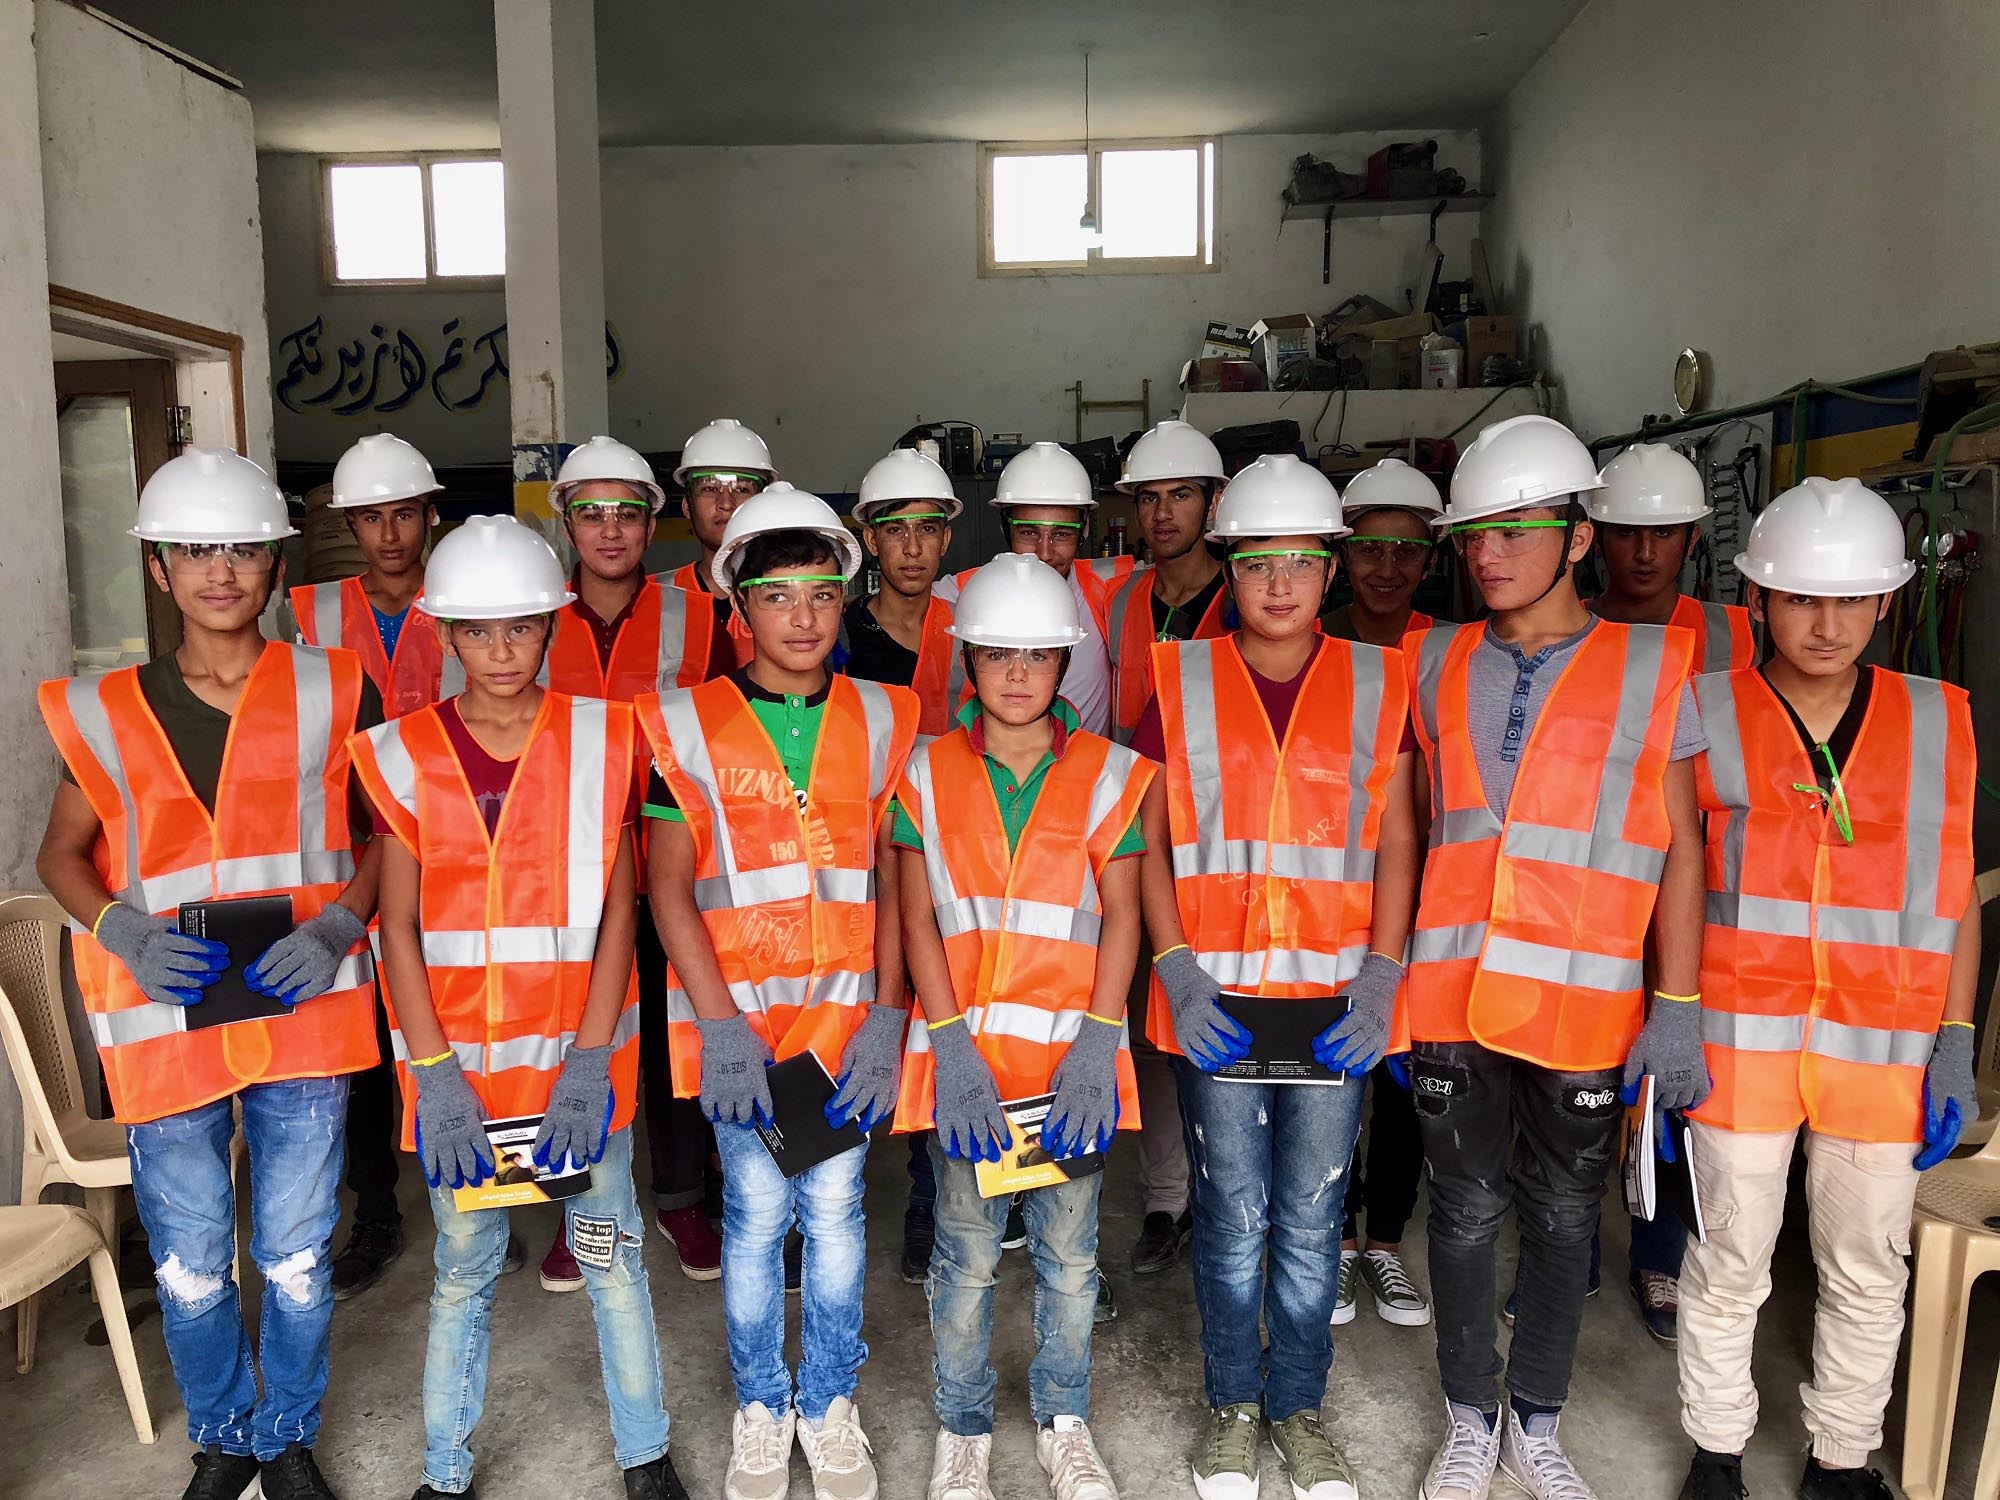 Group photo of Anera’s latest cohort of ‘Home Electricity’ students at the Bekaa Valley.